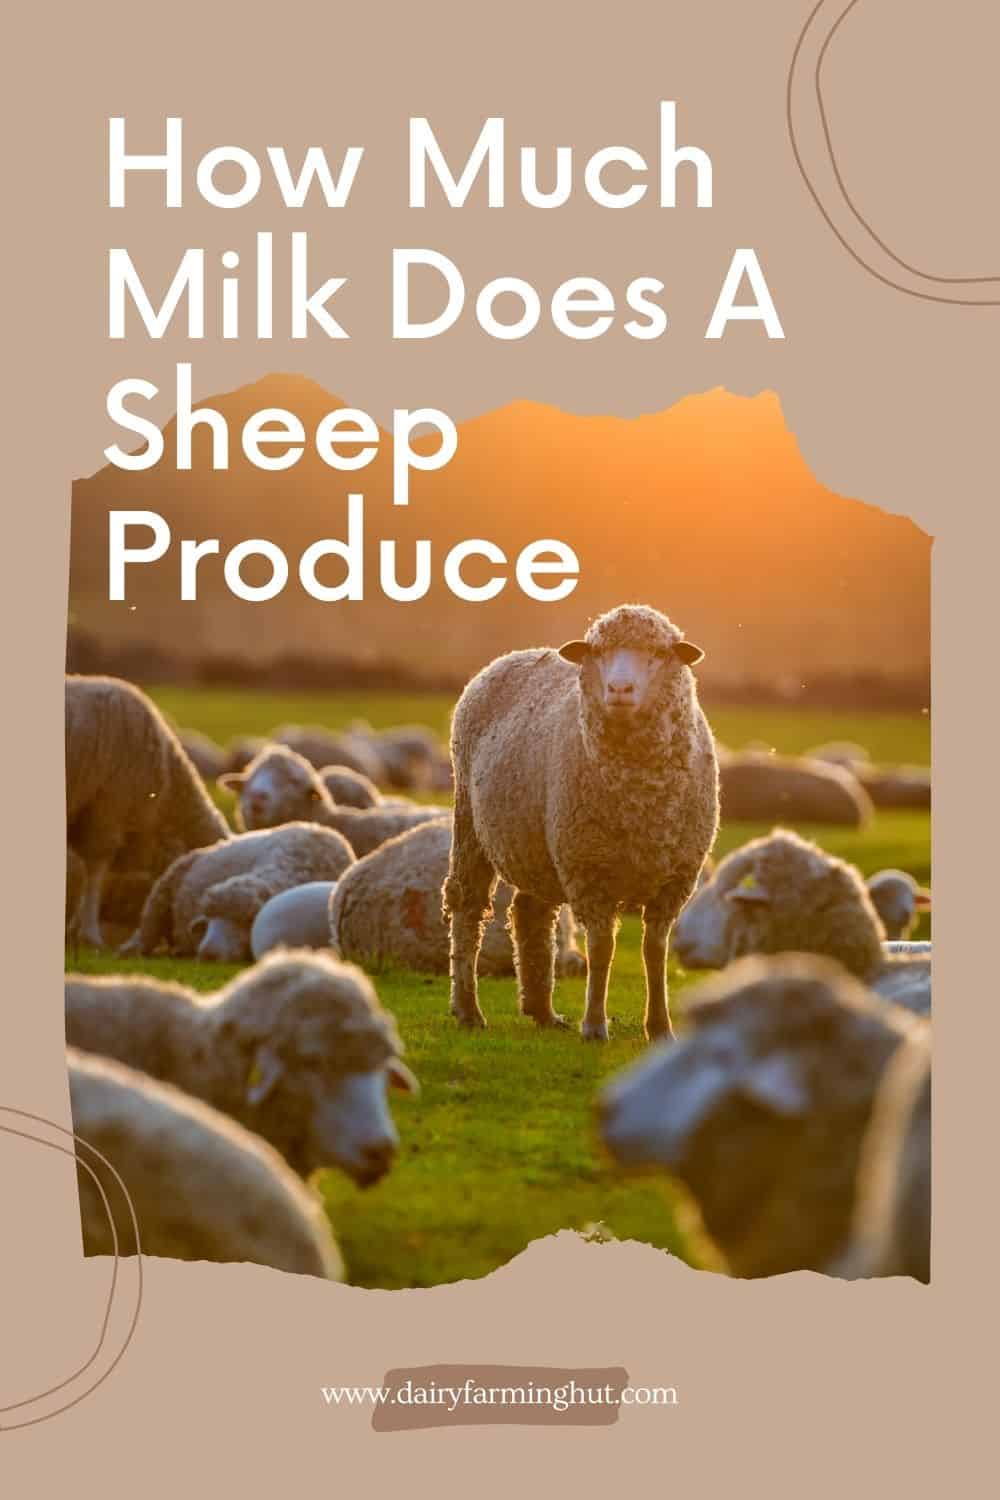 How Much Milk Does A Sheep Produce